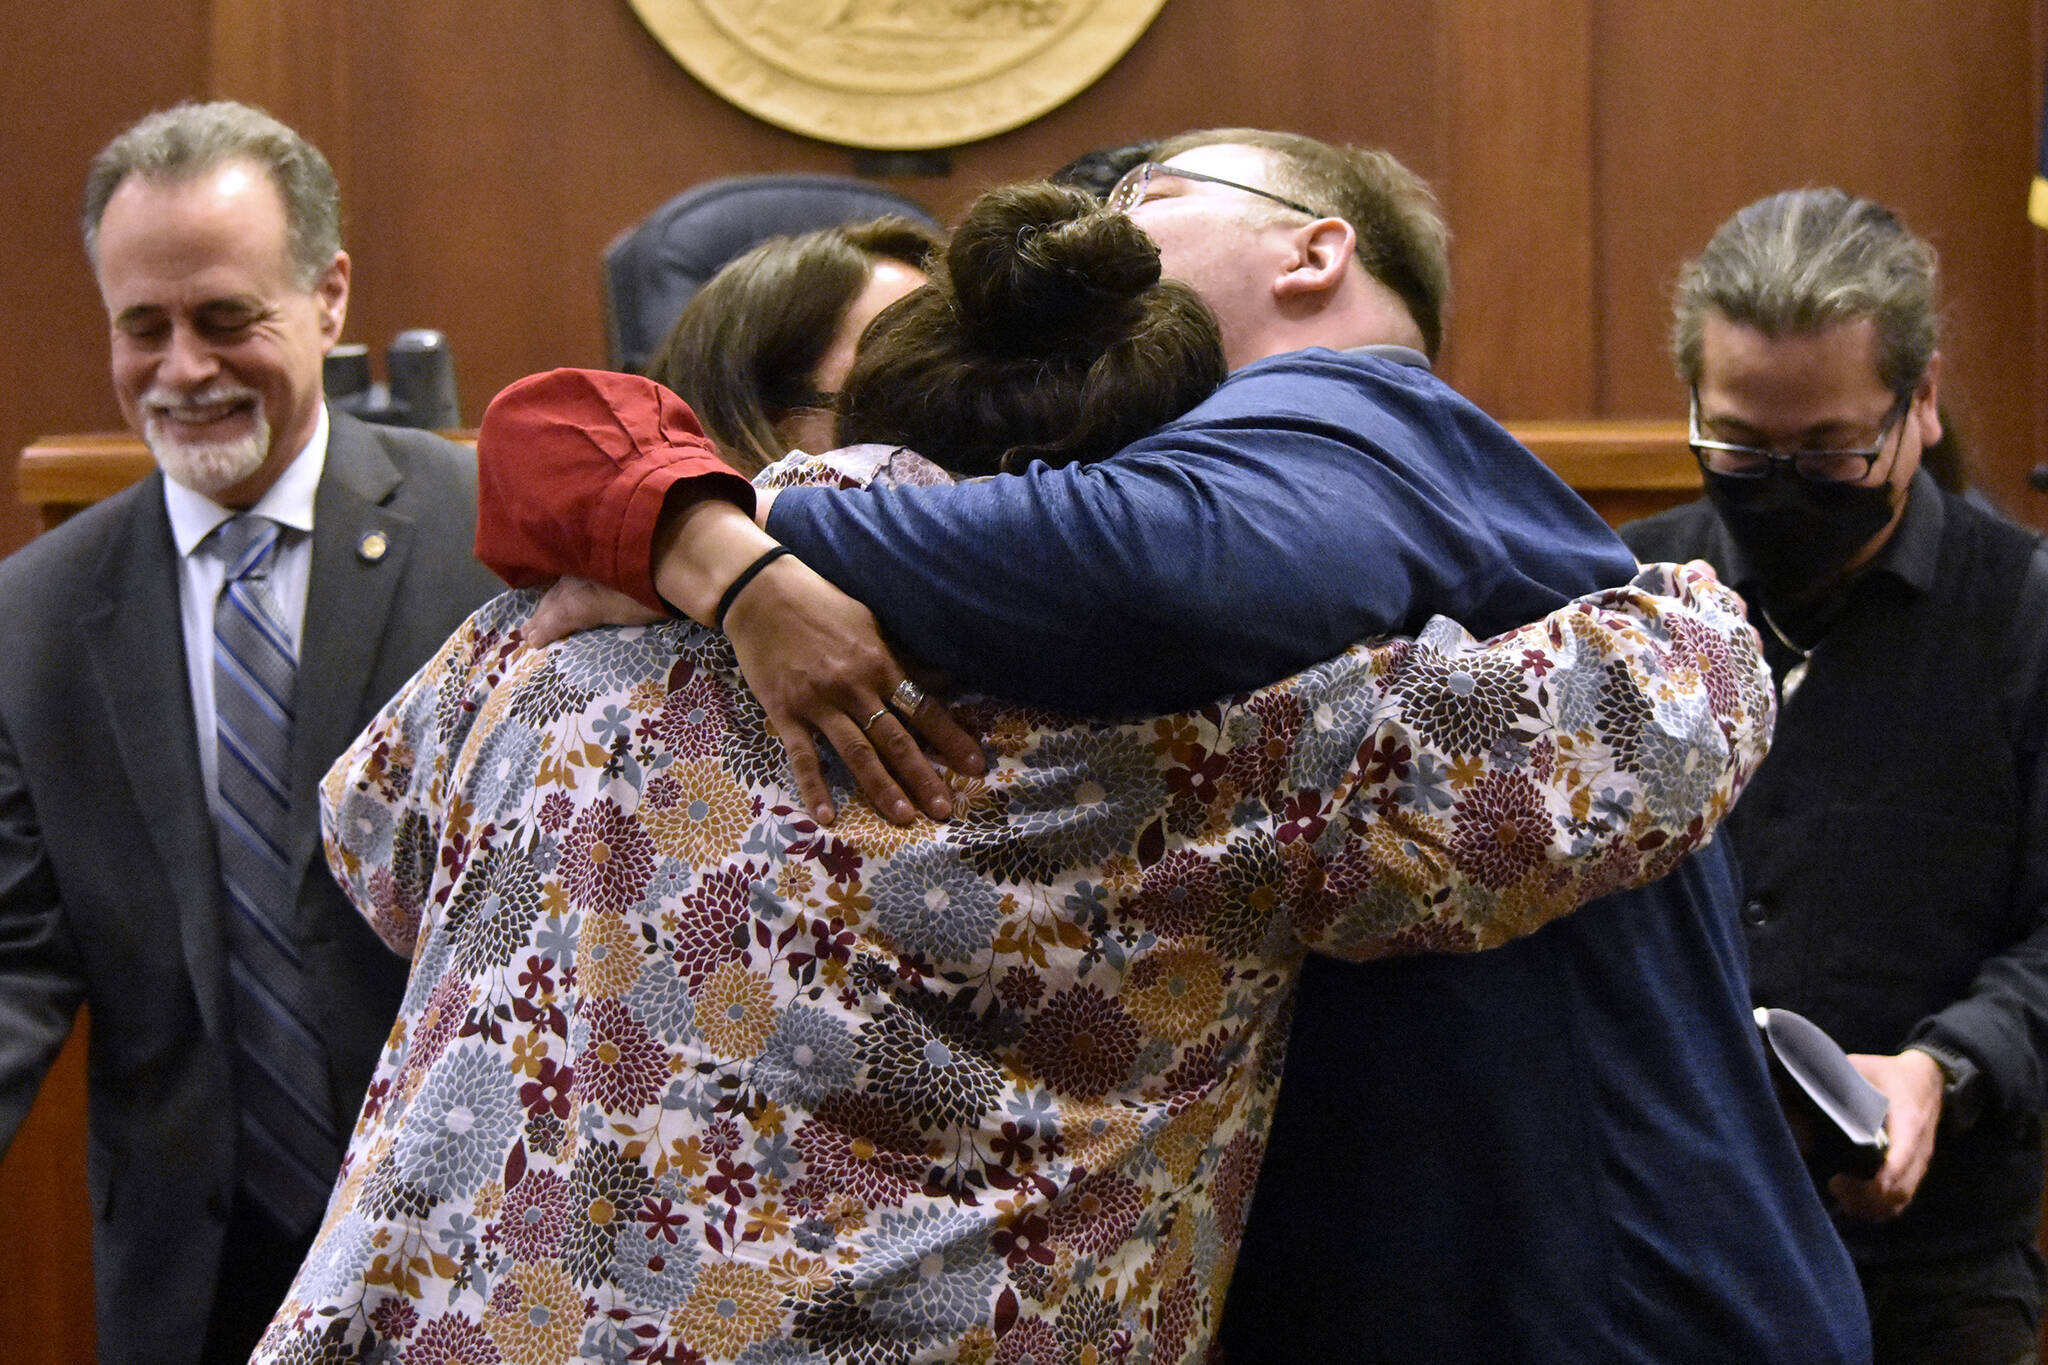 Tribal leaders hug in the Alaska State Senate chambers May 13, 2022, after the Senate passes a bill giving state recognition to 229 federally recognized Alaska Native tribes. (Peter Segall / Juneau Empire)